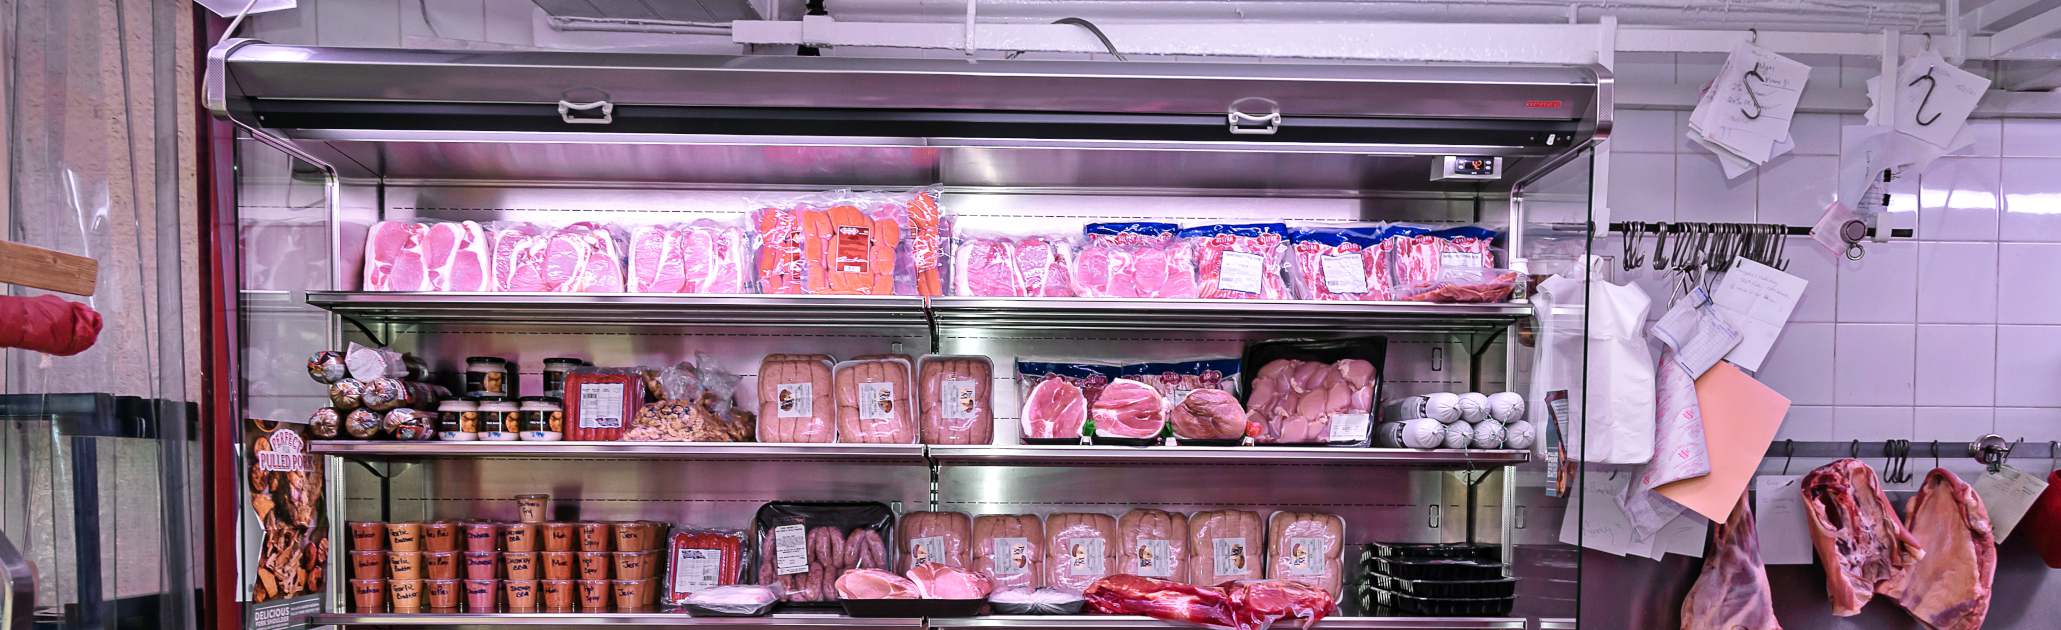 Keeping food fresh from dairy to meat